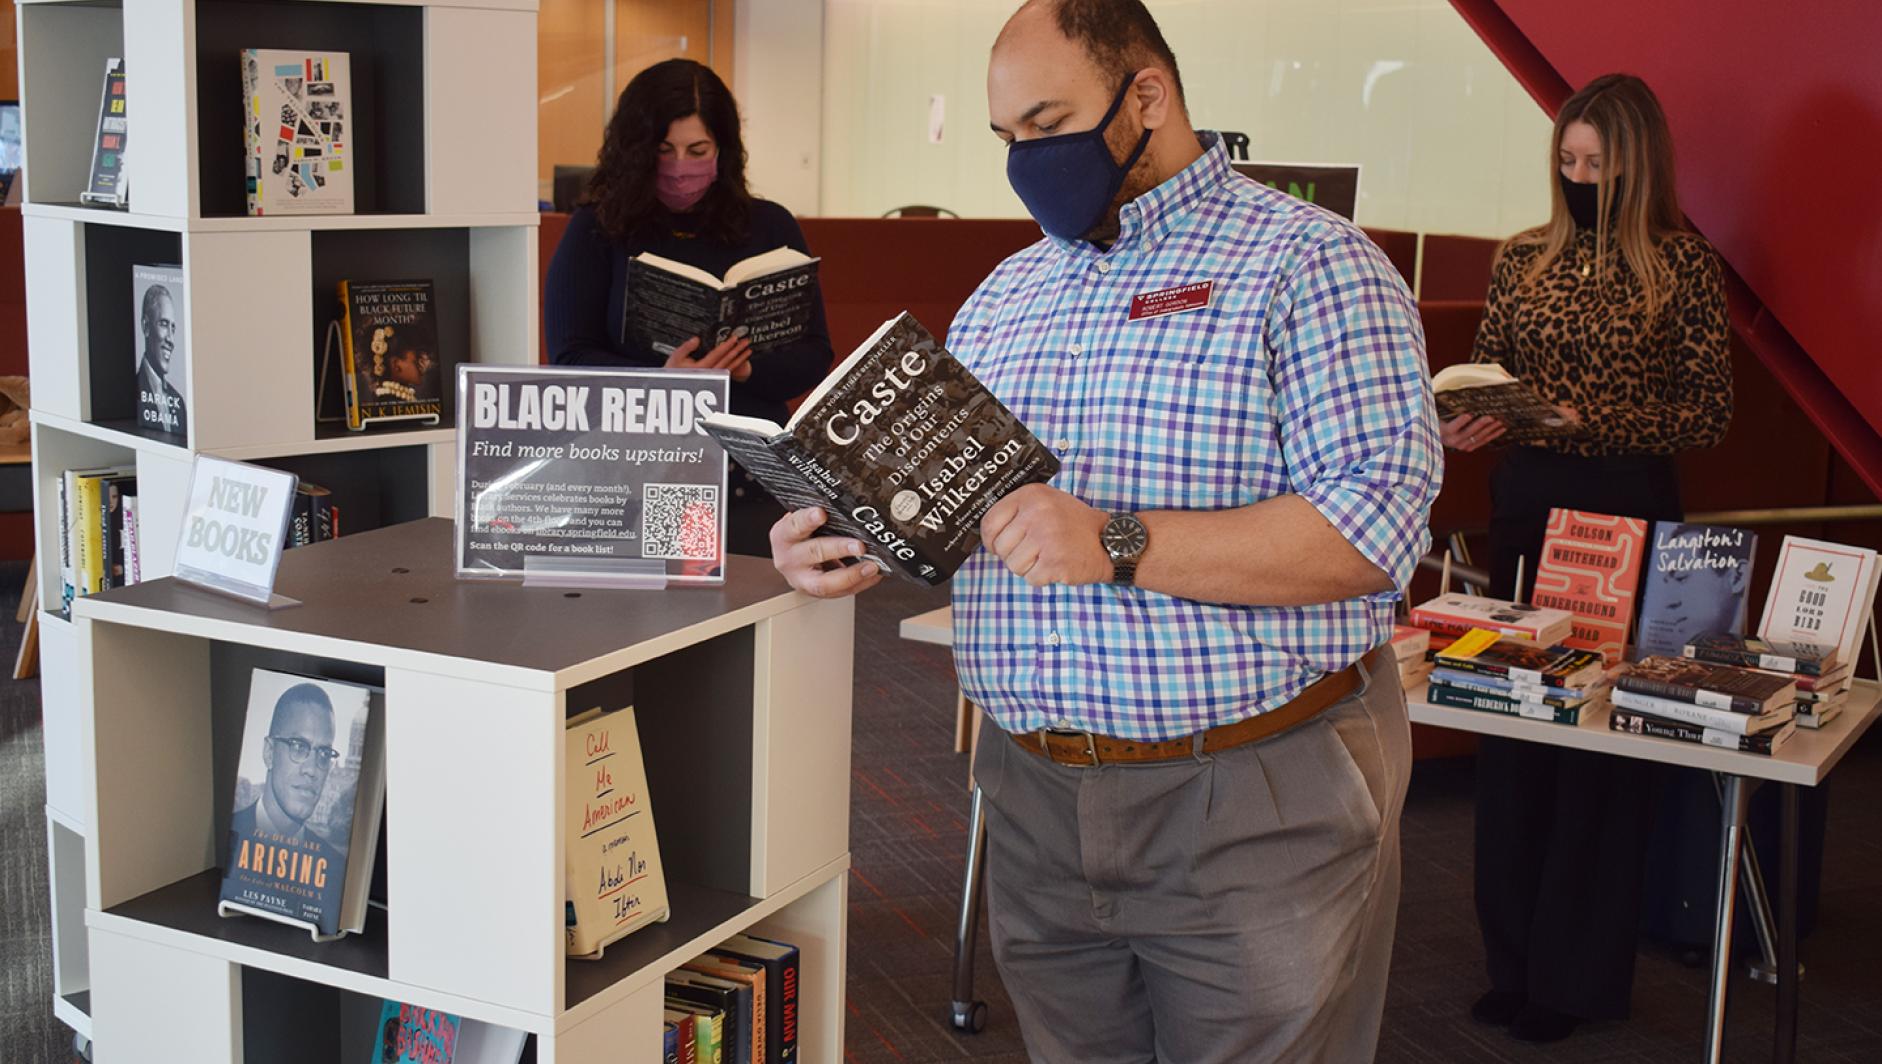 Library staff reading books by Black authors